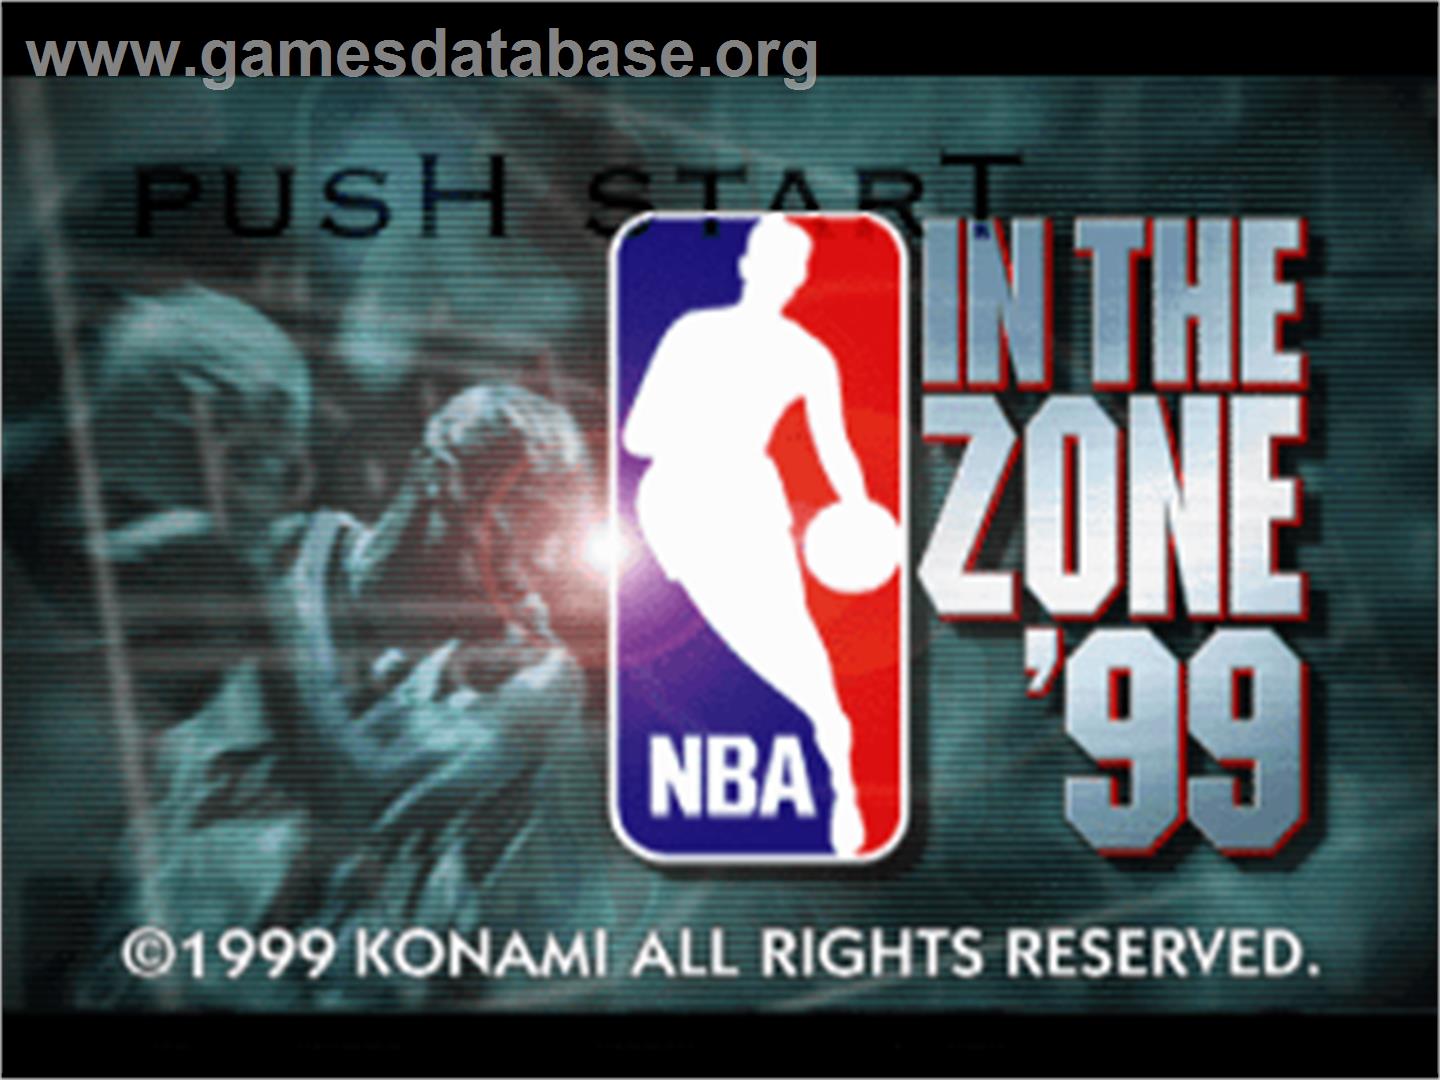 NBA in the Zone '99 - Sony Playstation - Artwork - Title Screen